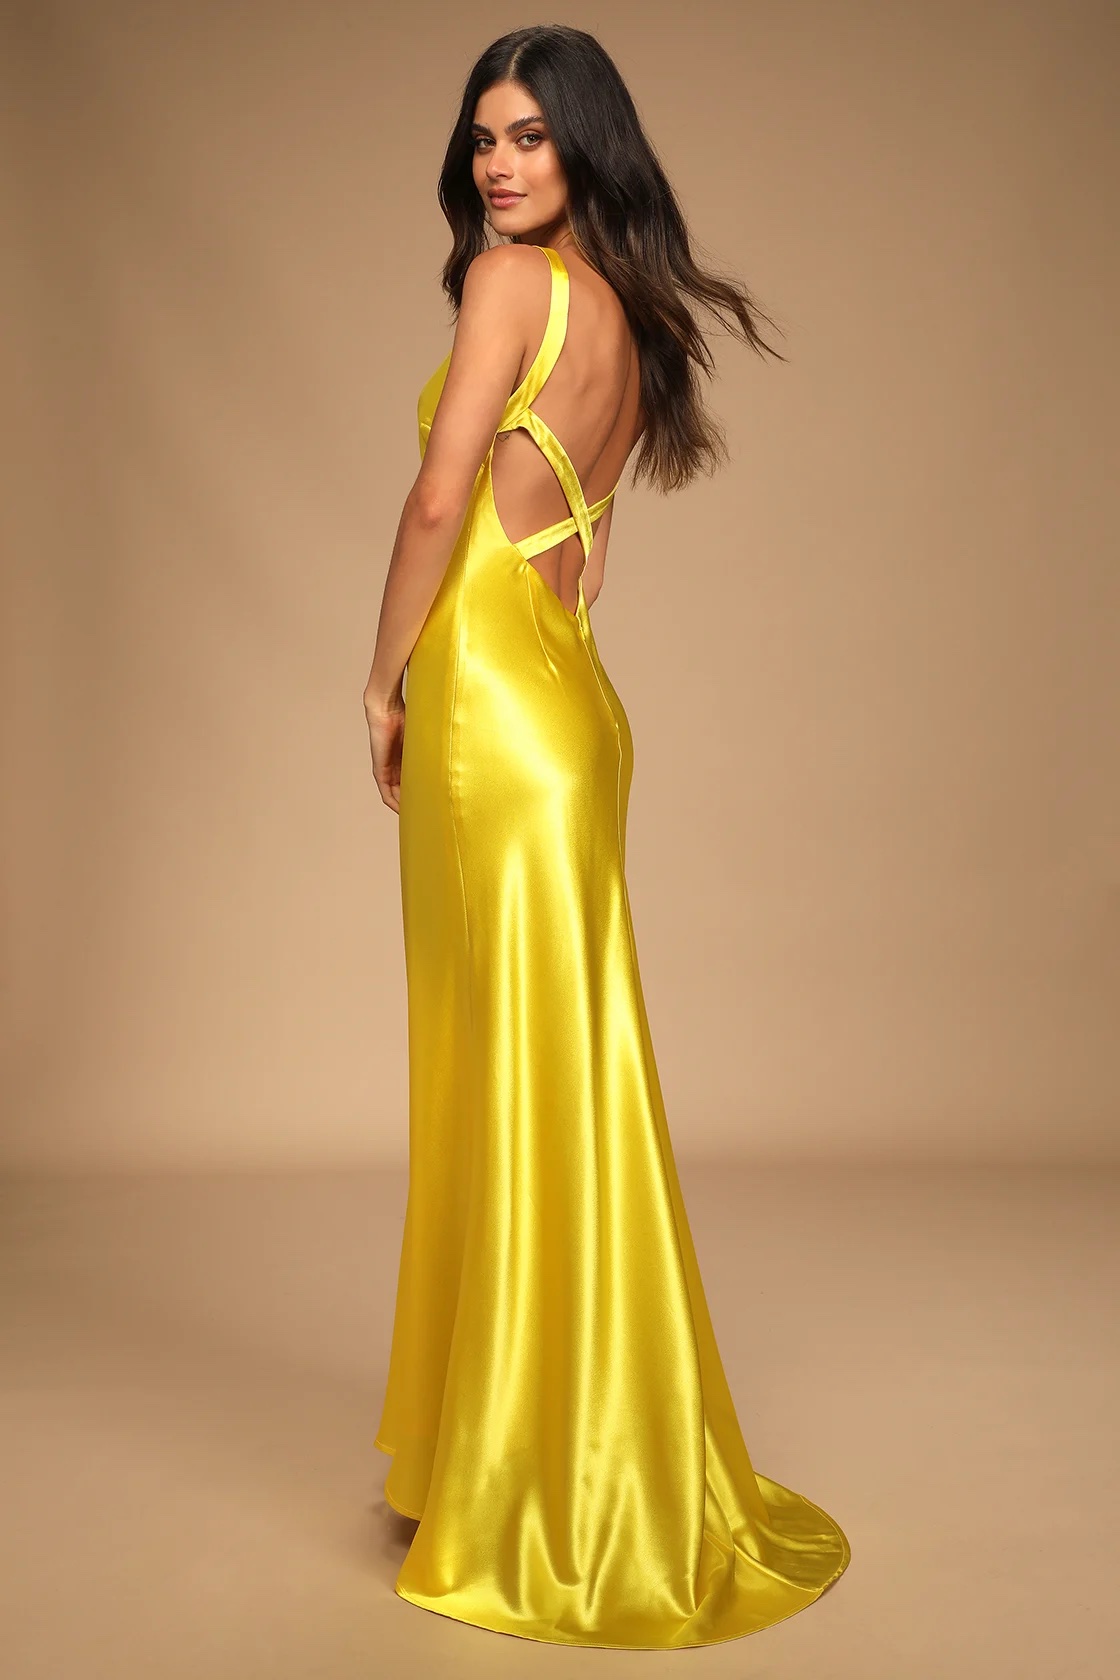 andie anderson yellow dress